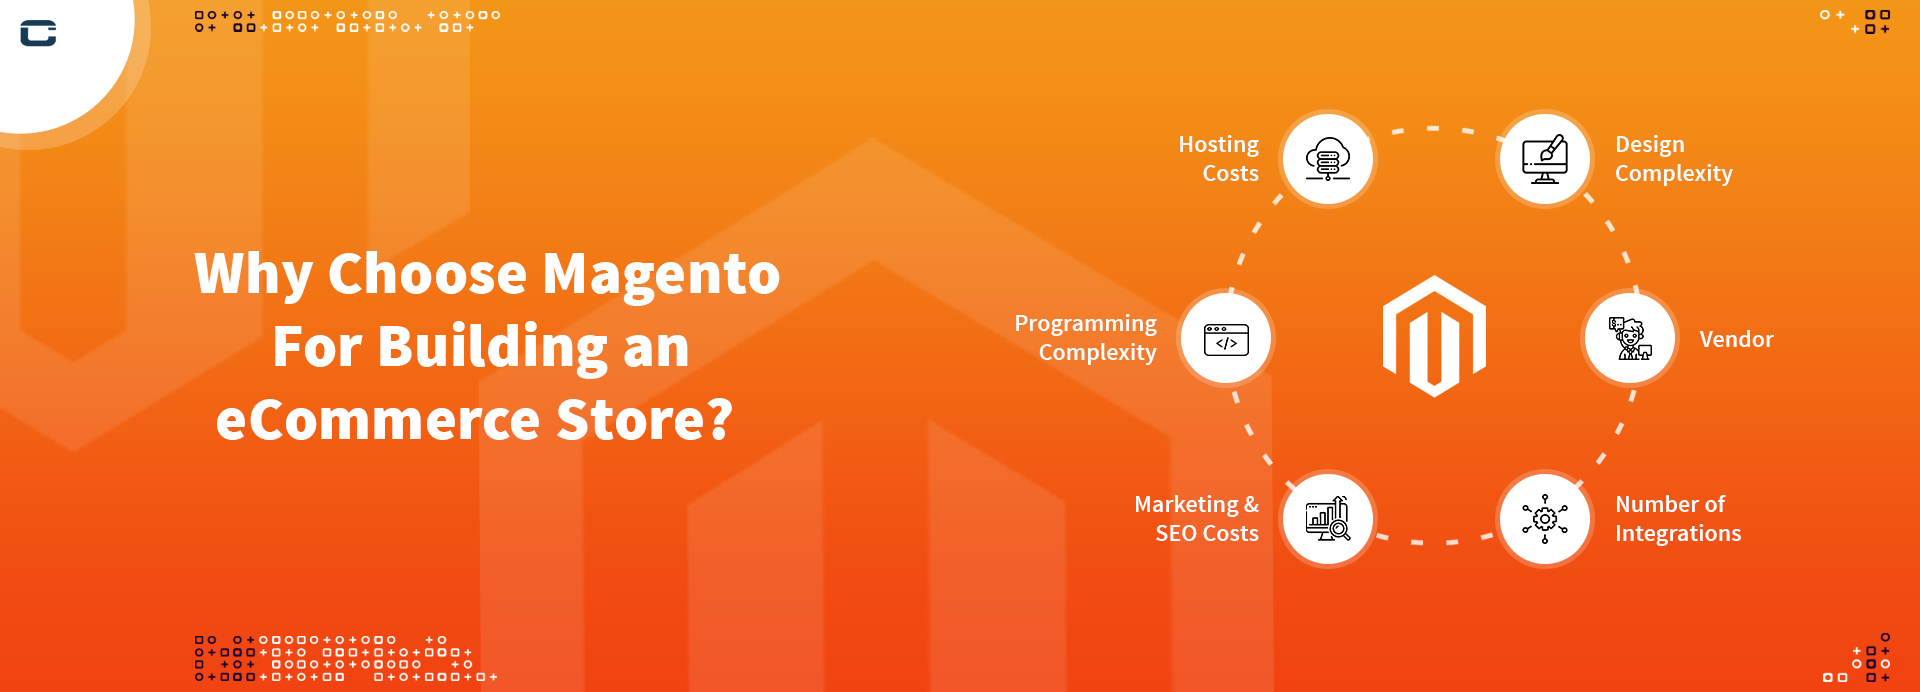 Why Choose Magento For Building an eCommerce Store?